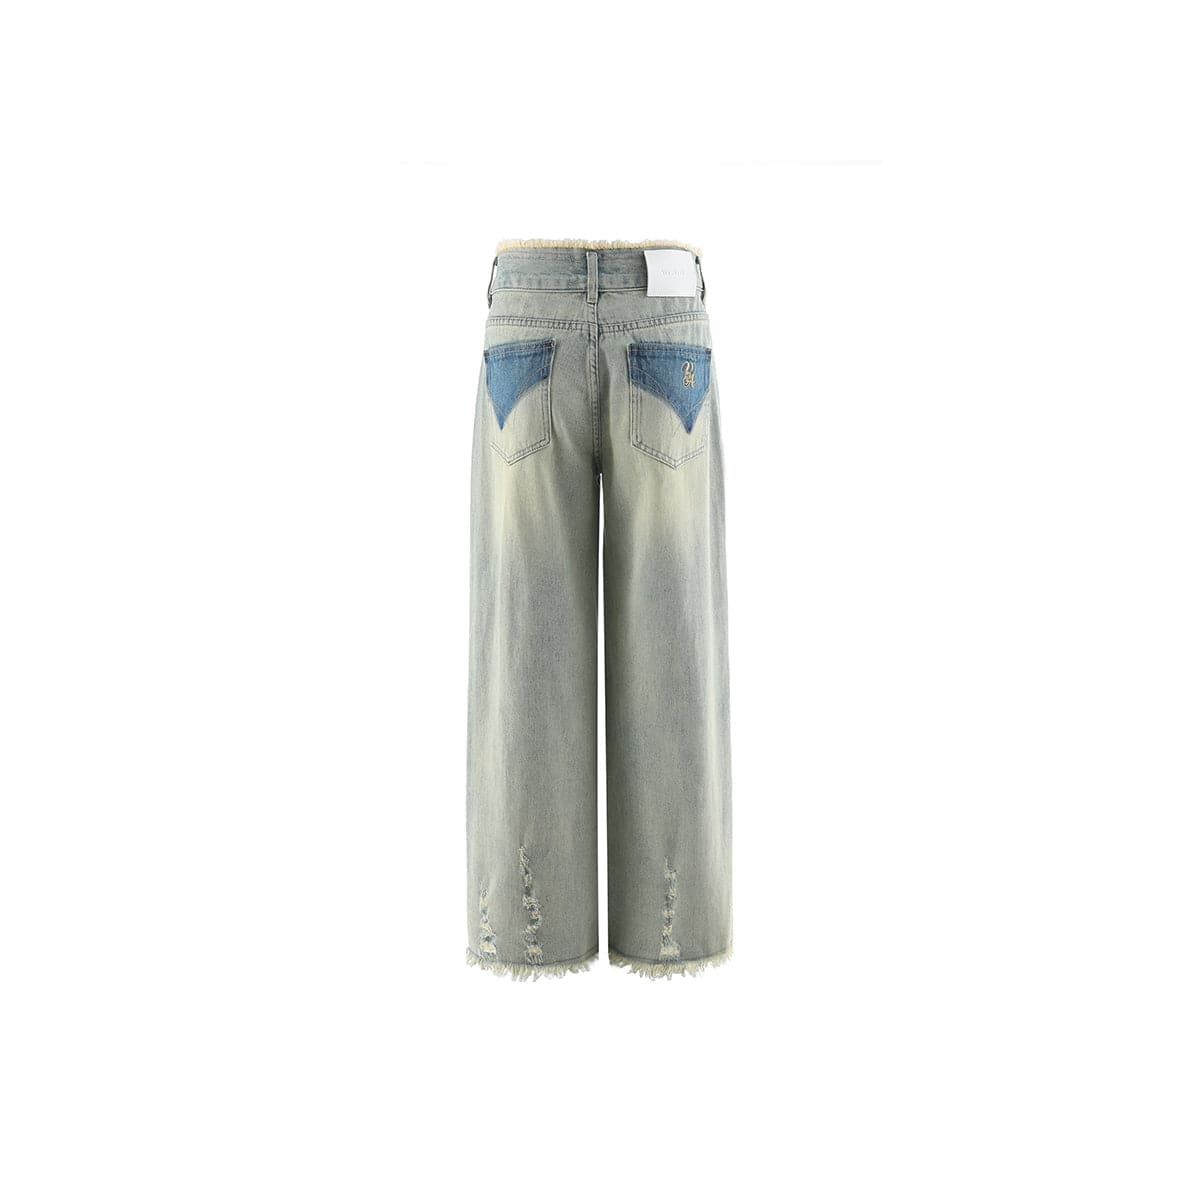 Blue Low-Waist Wide-Leg Jeans For Rugged Style - chiclara